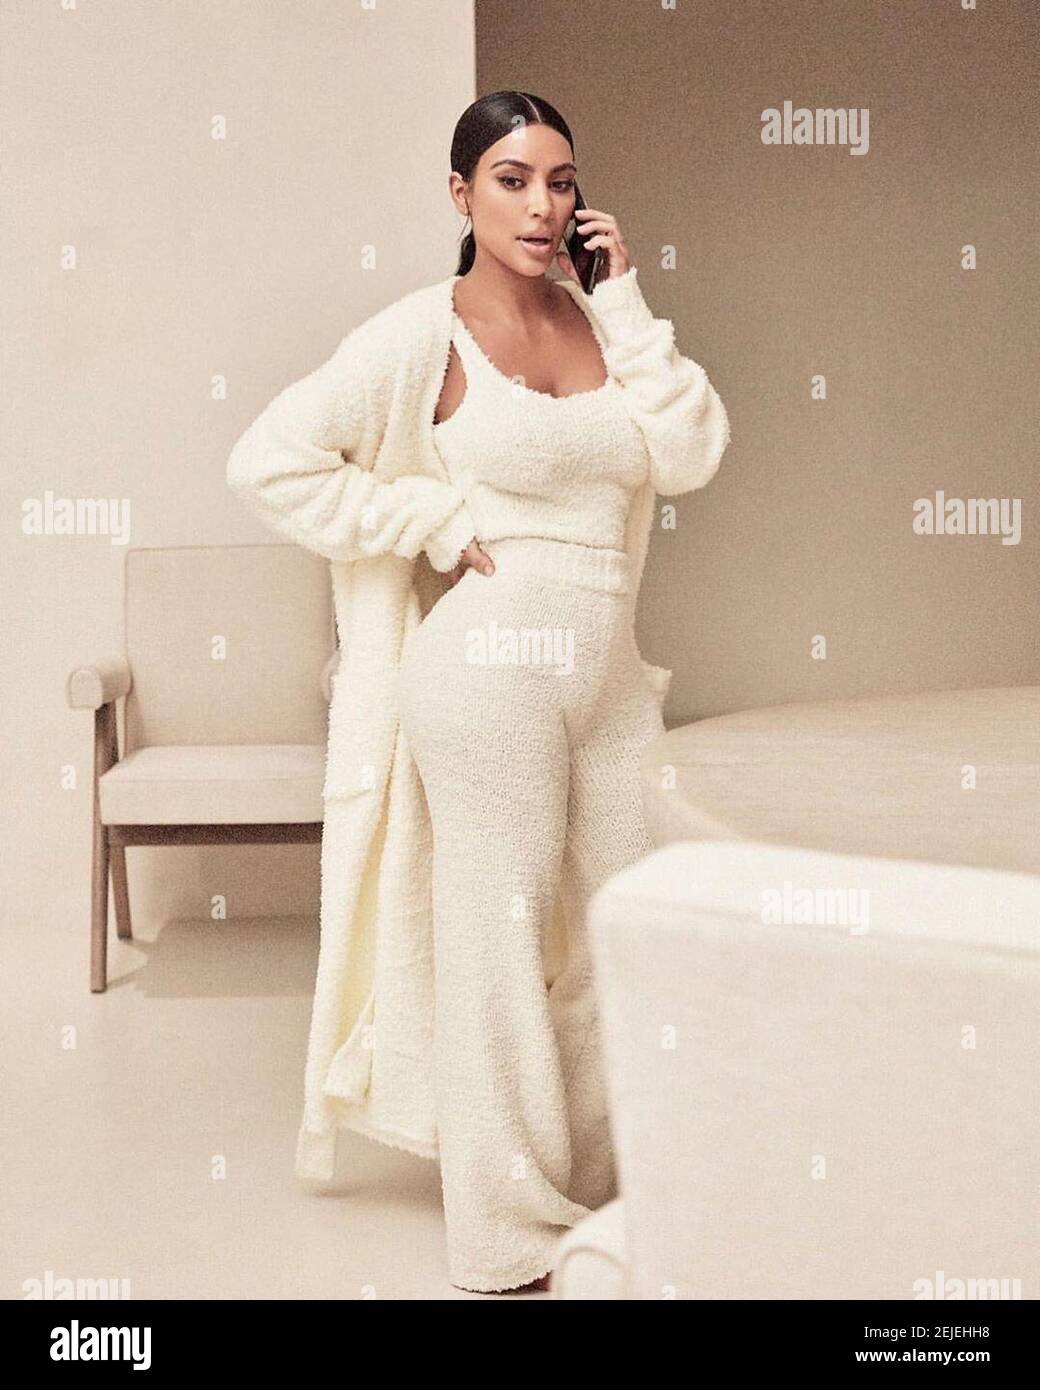 https://c8.alamy.com/comp/2EJEHH8/kris-jenner-releases-a-photo-on-instagram-with-the-following-caption-cant-wait-for-the-@skims-cozy-collection-launch!-monday-9am-pst-on-skimscom-repost-@kimkardashian-omg-ive-been-dying-to-share-this-with-you-guys-its-probably-my-most-exciting-@skims-launch-yet!!!-the-cozy-collection-has-pajamas-loungewear-pieces-that-i-have-been-living-in-at-home-i-even-sleep-in-this-robe-sometimes!-it-comes-in-4-amazing-colors-you-guys-are-going-to-die-when-you-feel-how-soft-this-fabric-is-you-will-never-want-to-take-it-off!-the-@skims-cozy-collection-drops-on-monday-1209-at-9am-pst-at-sk-2EJEHH8.jpg